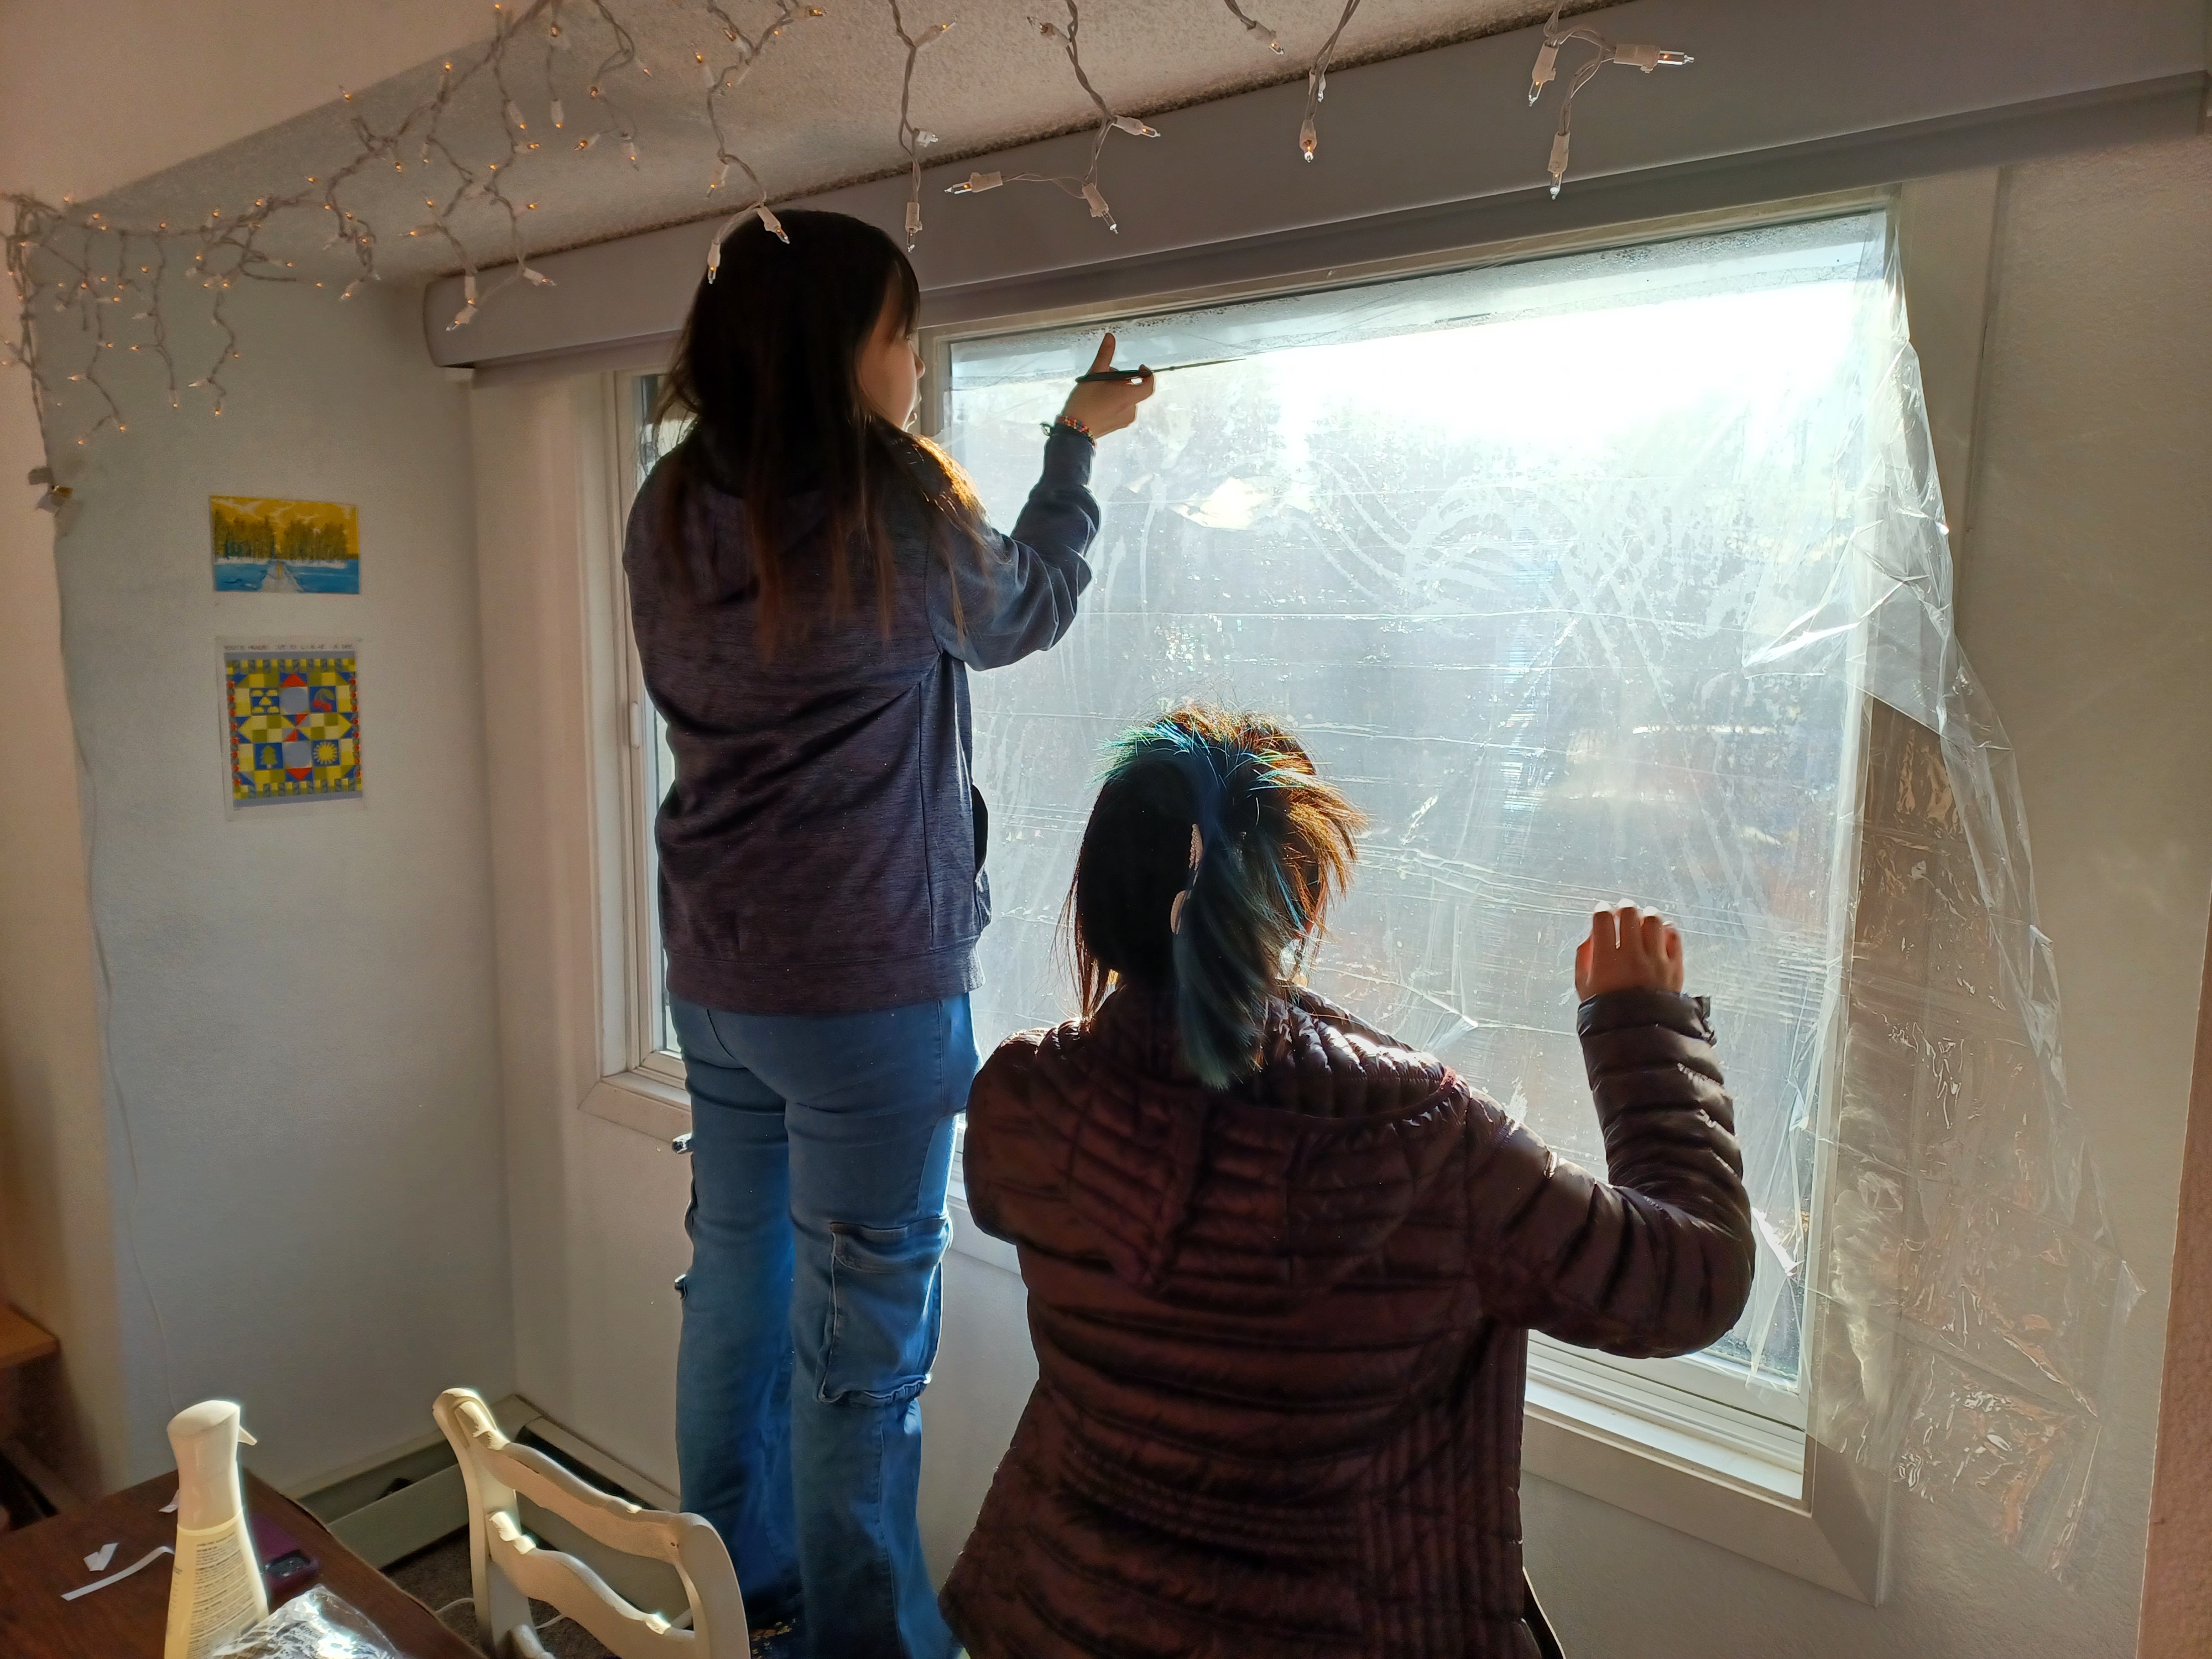 Students work together to retrofit a condo with window film. Photo by George Reising/ACEP.